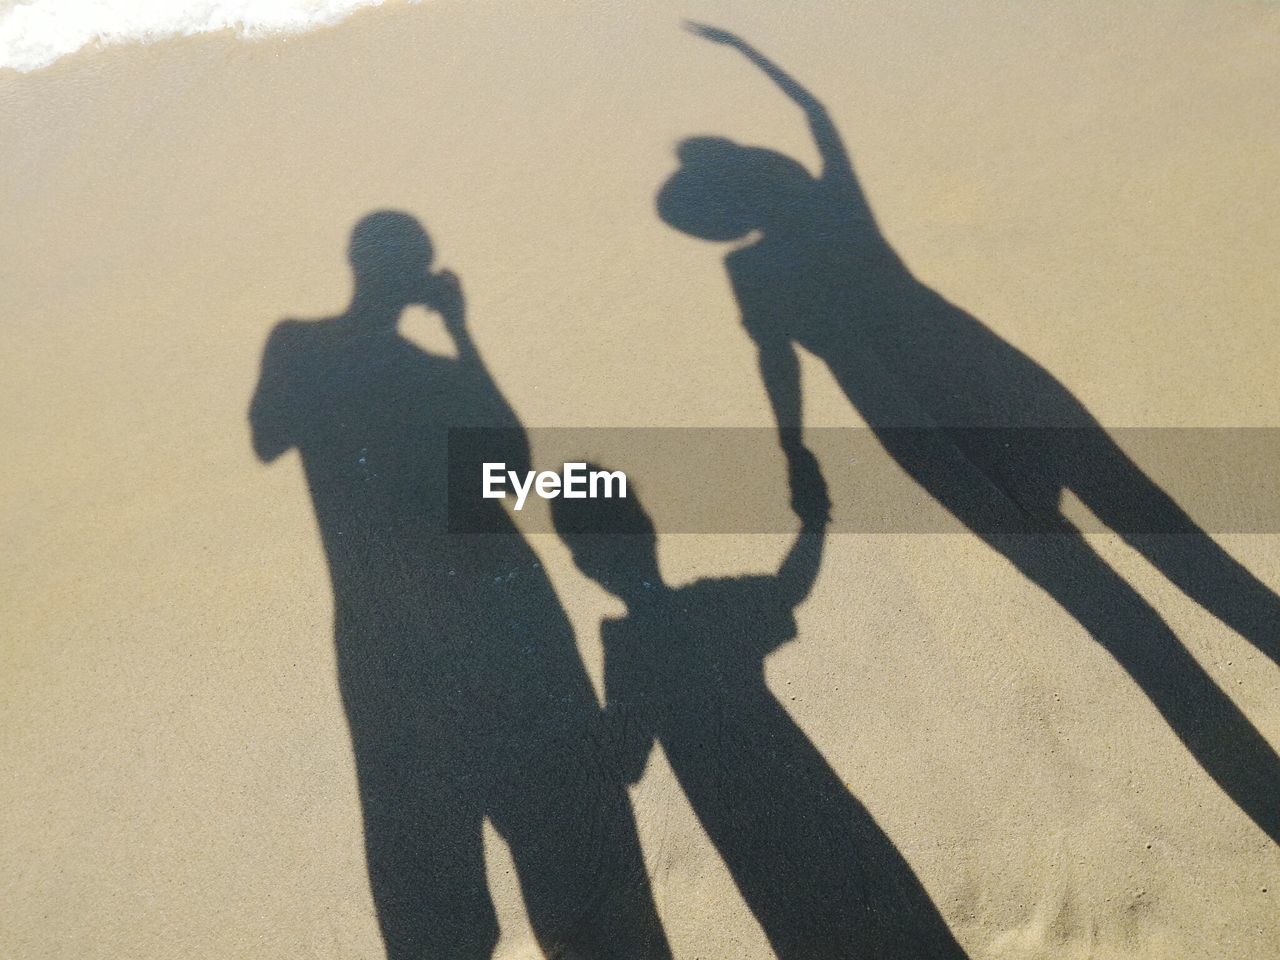 Shadow of family at beach during sunny day